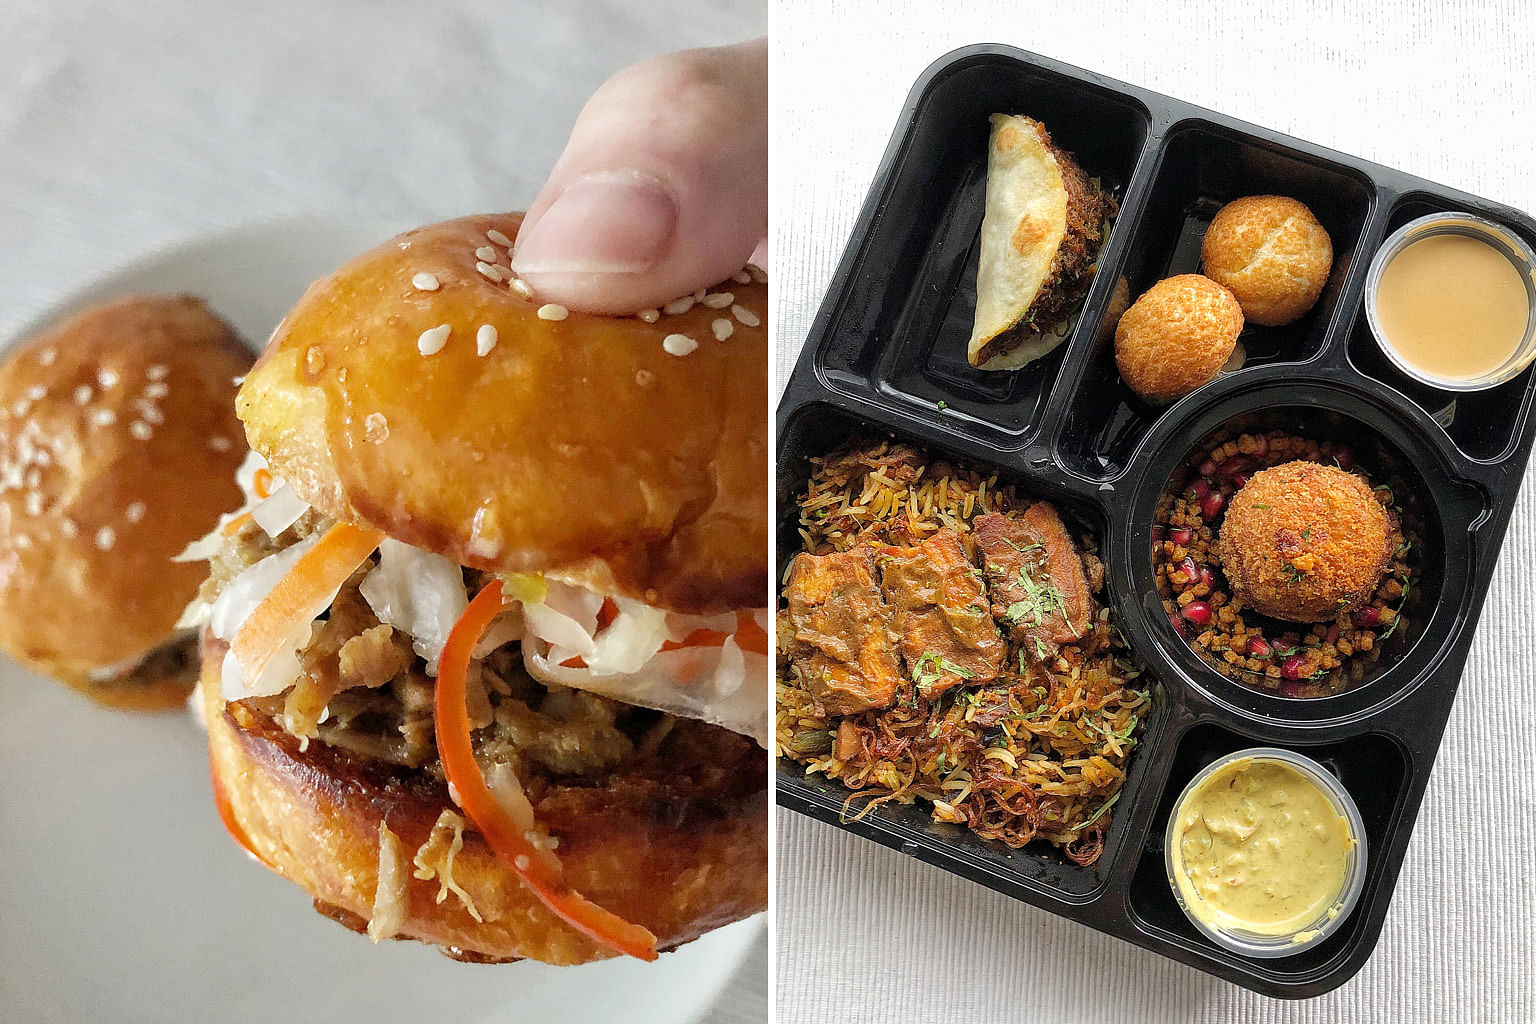 Cumin Spiced Pulled Lamb Sliders (above left) and Express Set Lunch for one (above) from Thevar in Keong Saik Road. The set lunch includes a Tapioca & Lentil Croquette, Chettinad Chicken Roti, Pork Briyani and two Spiced Rum & Banana Puffs.